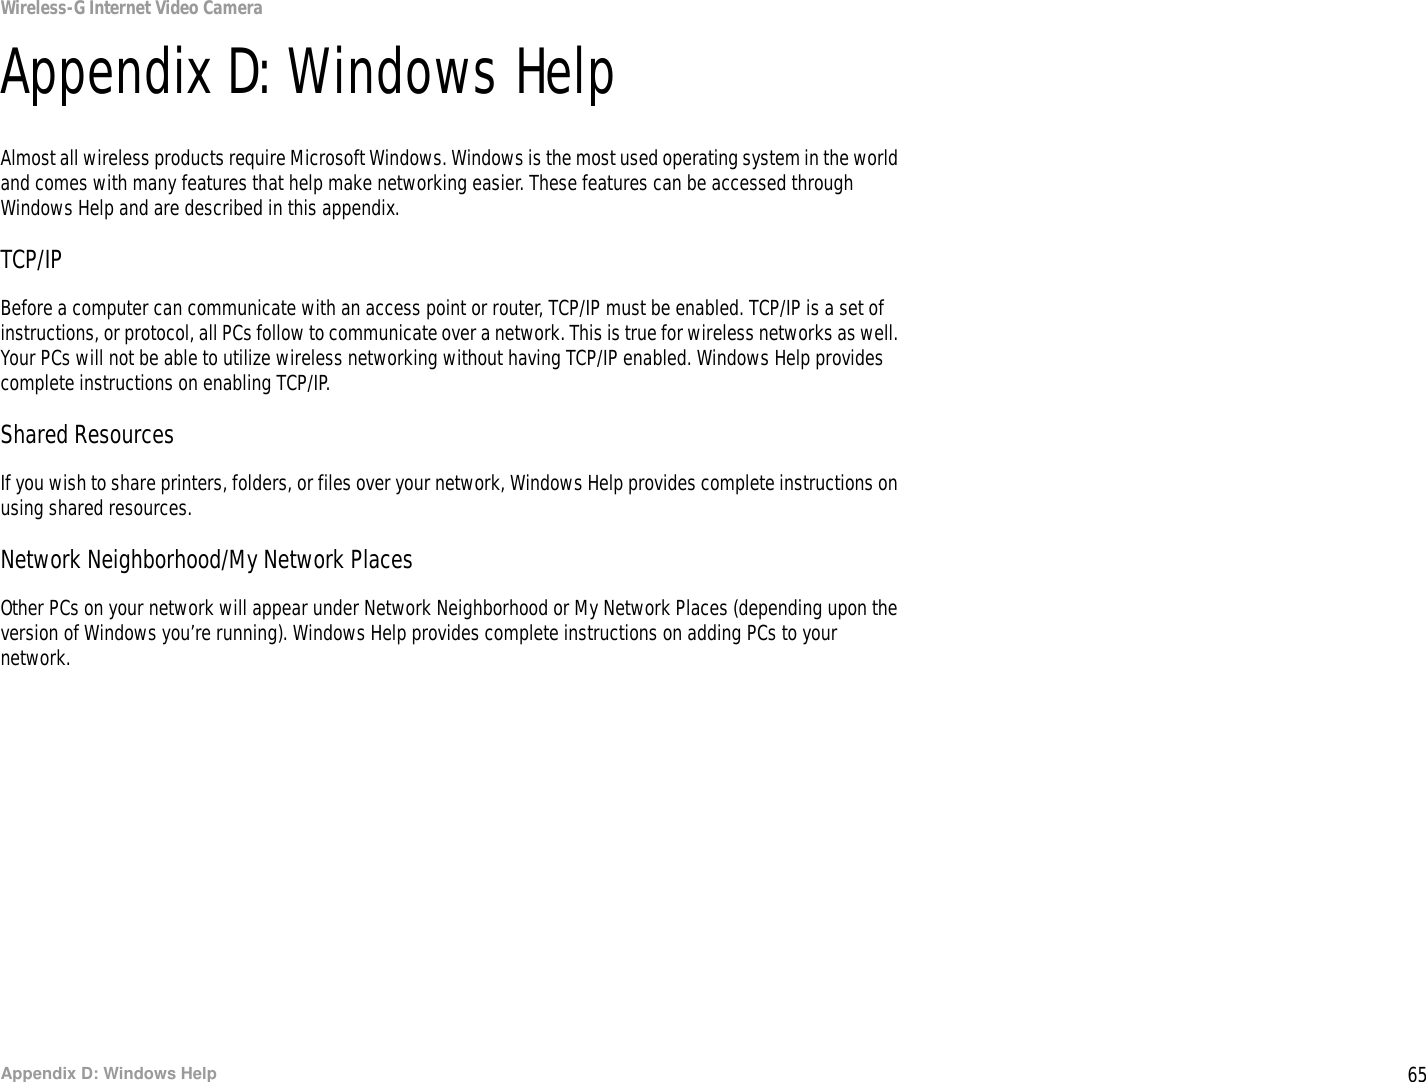 65Appendix D: Windows HelpWireless-G Internet Video CameraAppendix D: Windows HelpAlmost all wireless products require Microsoft Windows. Windows is the most used operating system in the world and comes with many features that help make networking easier. These features can be accessed through Windows Help and are described in this appendix.TCP/IPBefore a computer can communicate with an access point or router, TCP/IP must be enabled. TCP/IP is a set of instructions, or protocol, all PCs follow to communicate over a network. This is true for wireless networks as well. Your PCs will not be able to utilize wireless networking without having TCP/IP enabled. Windows Help provides complete instructions on enabling TCP/IP.Shared ResourcesIf you wish to share printers, folders, or files over your network, Windows Help provides complete instructions on using shared resources.Network Neighborhood/My Network PlacesOther PCs on your network will appear under Network Neighborhood or My Network Places (depending upon the version of Windows you’re running). Windows Help provides complete instructions on adding PCs to your network.